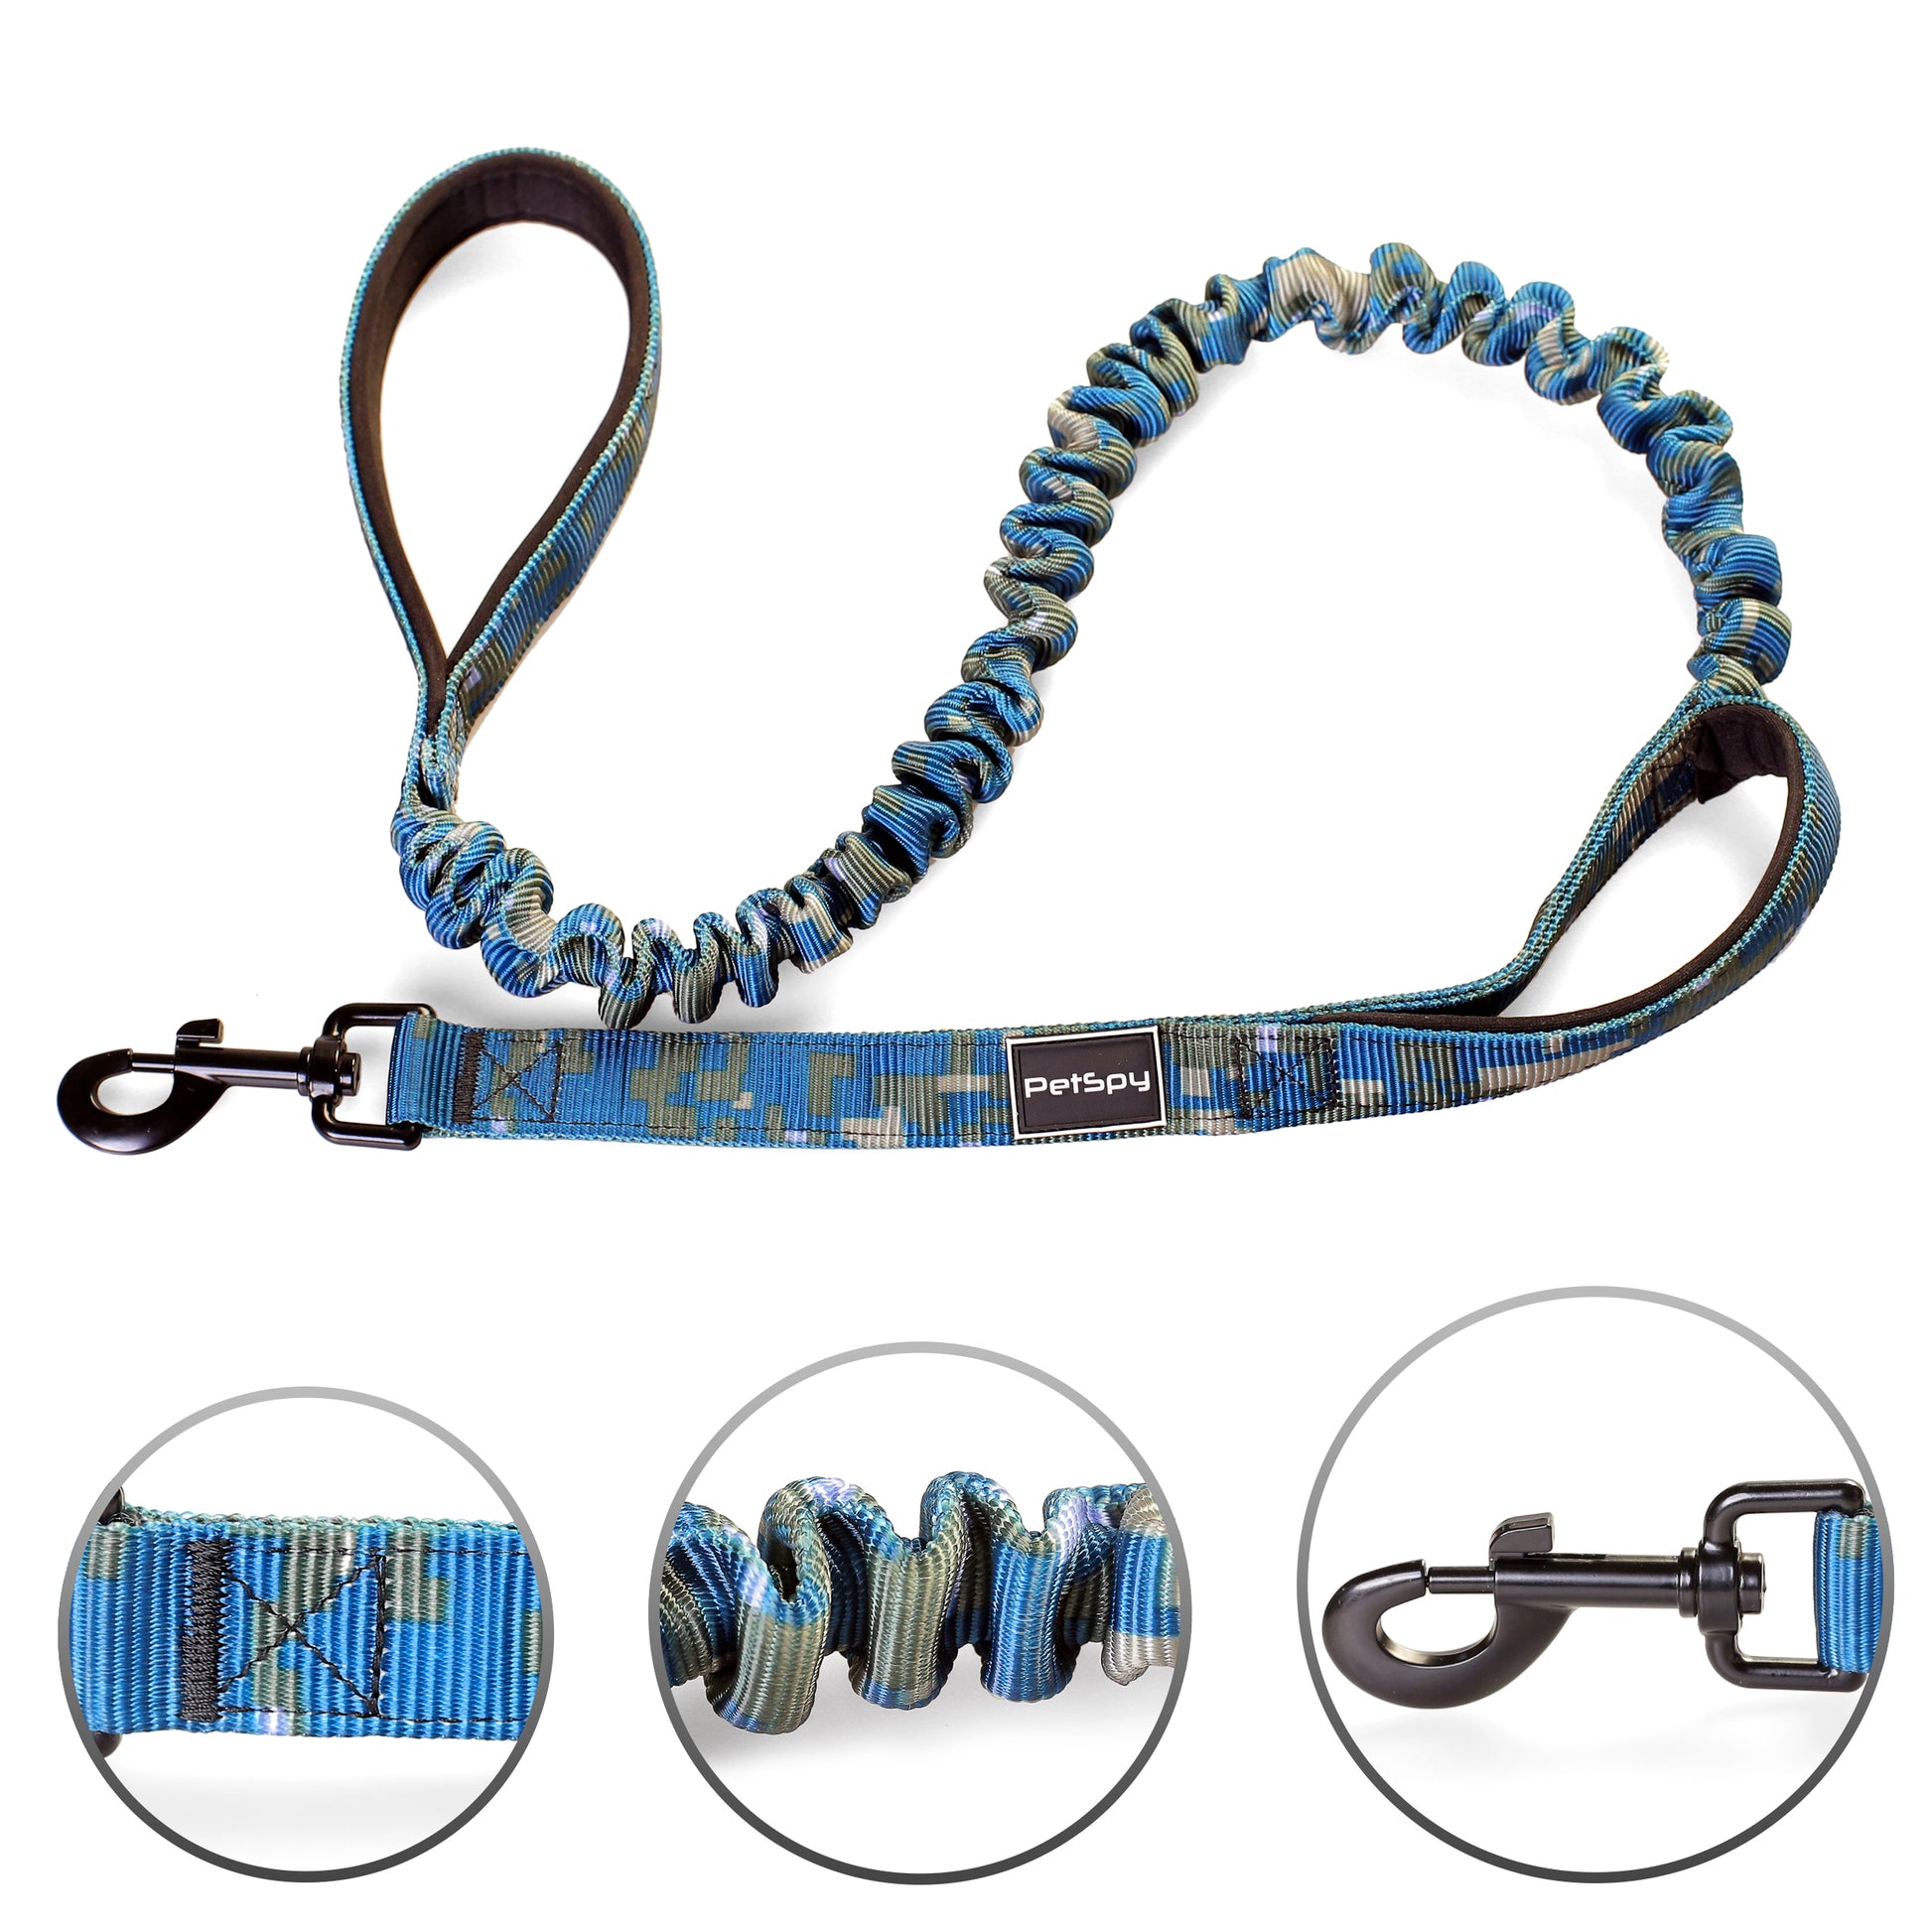 The included two-handle bungee leash provides extra control and safety during your walks or training sessions